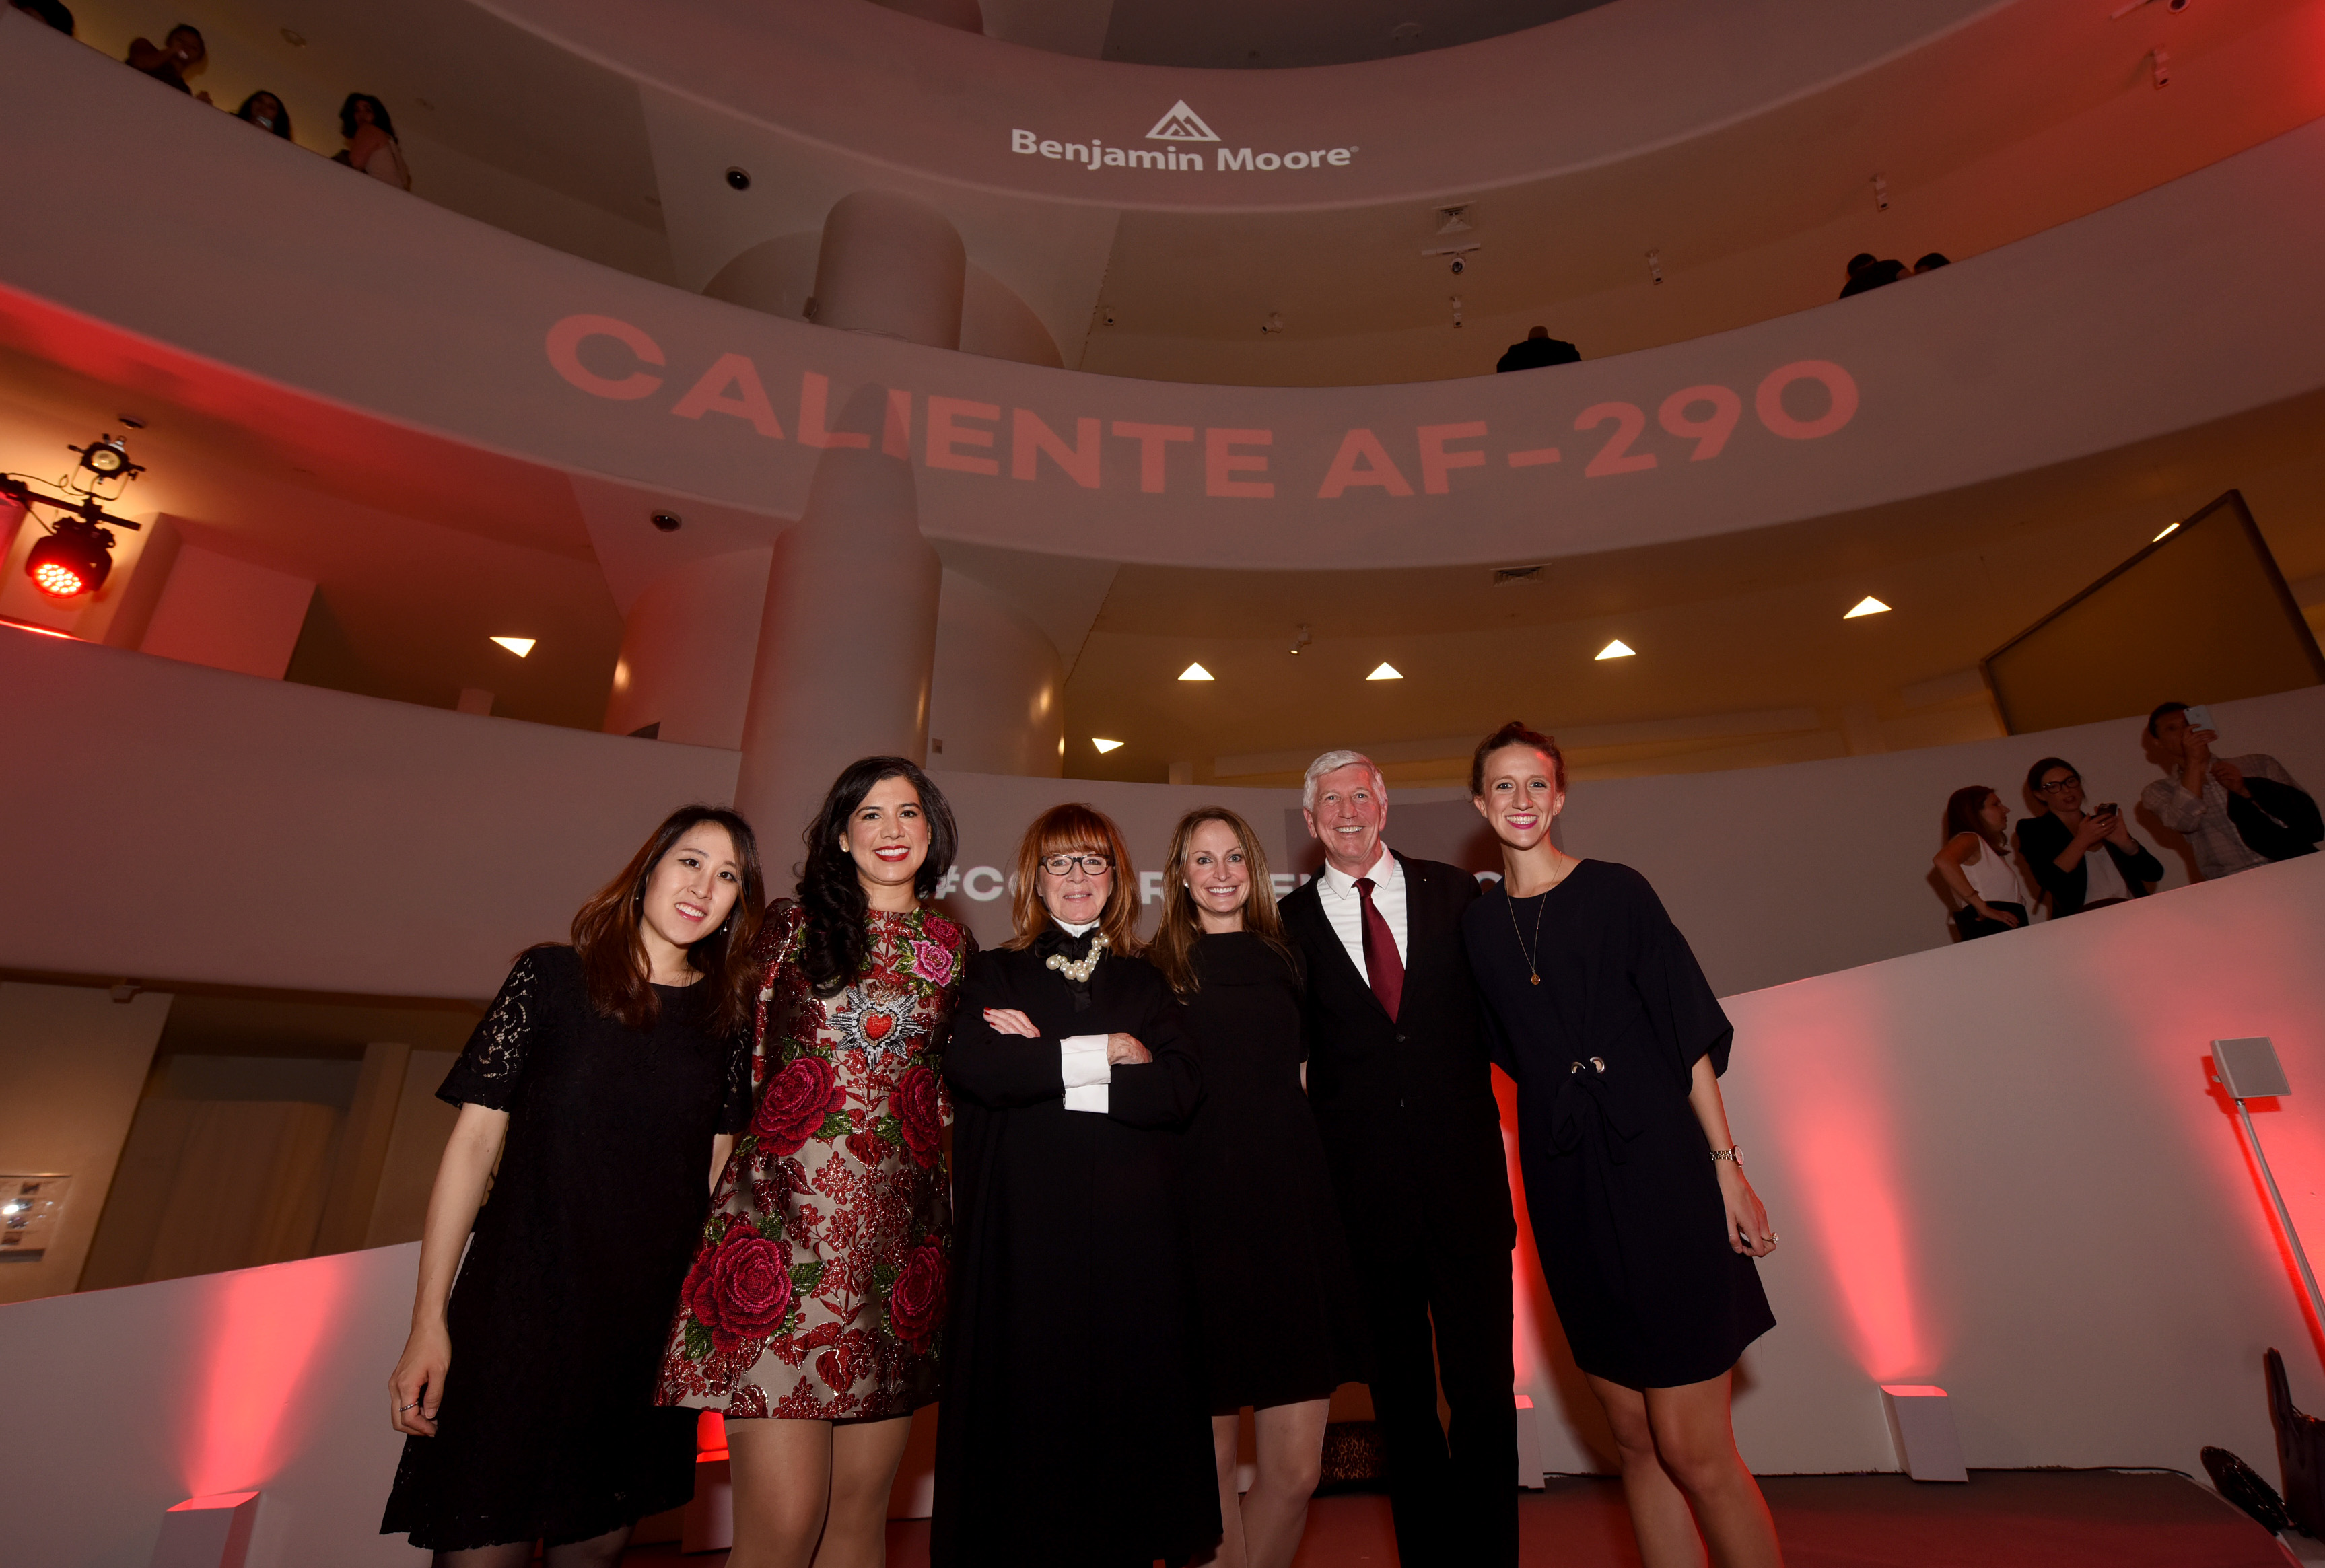 Caliente announced as Color of the Year